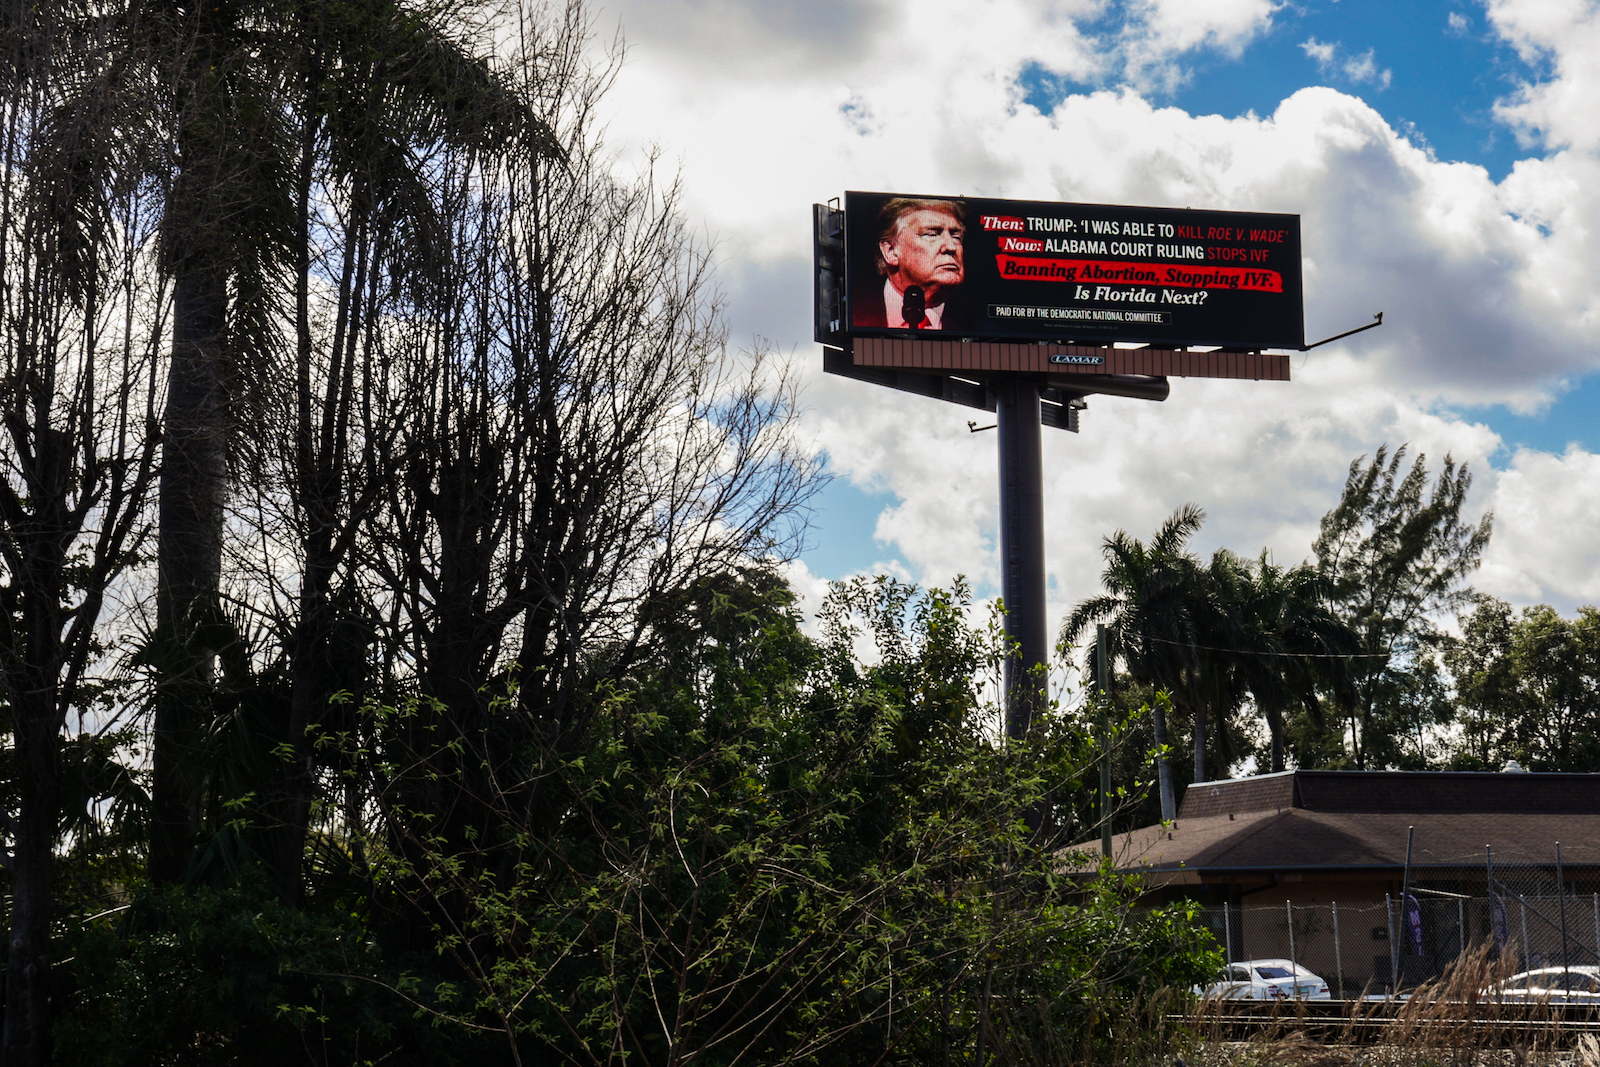 A billboard with a photo of Trump that hints that Trump policies will disrupt IVF access in Florida